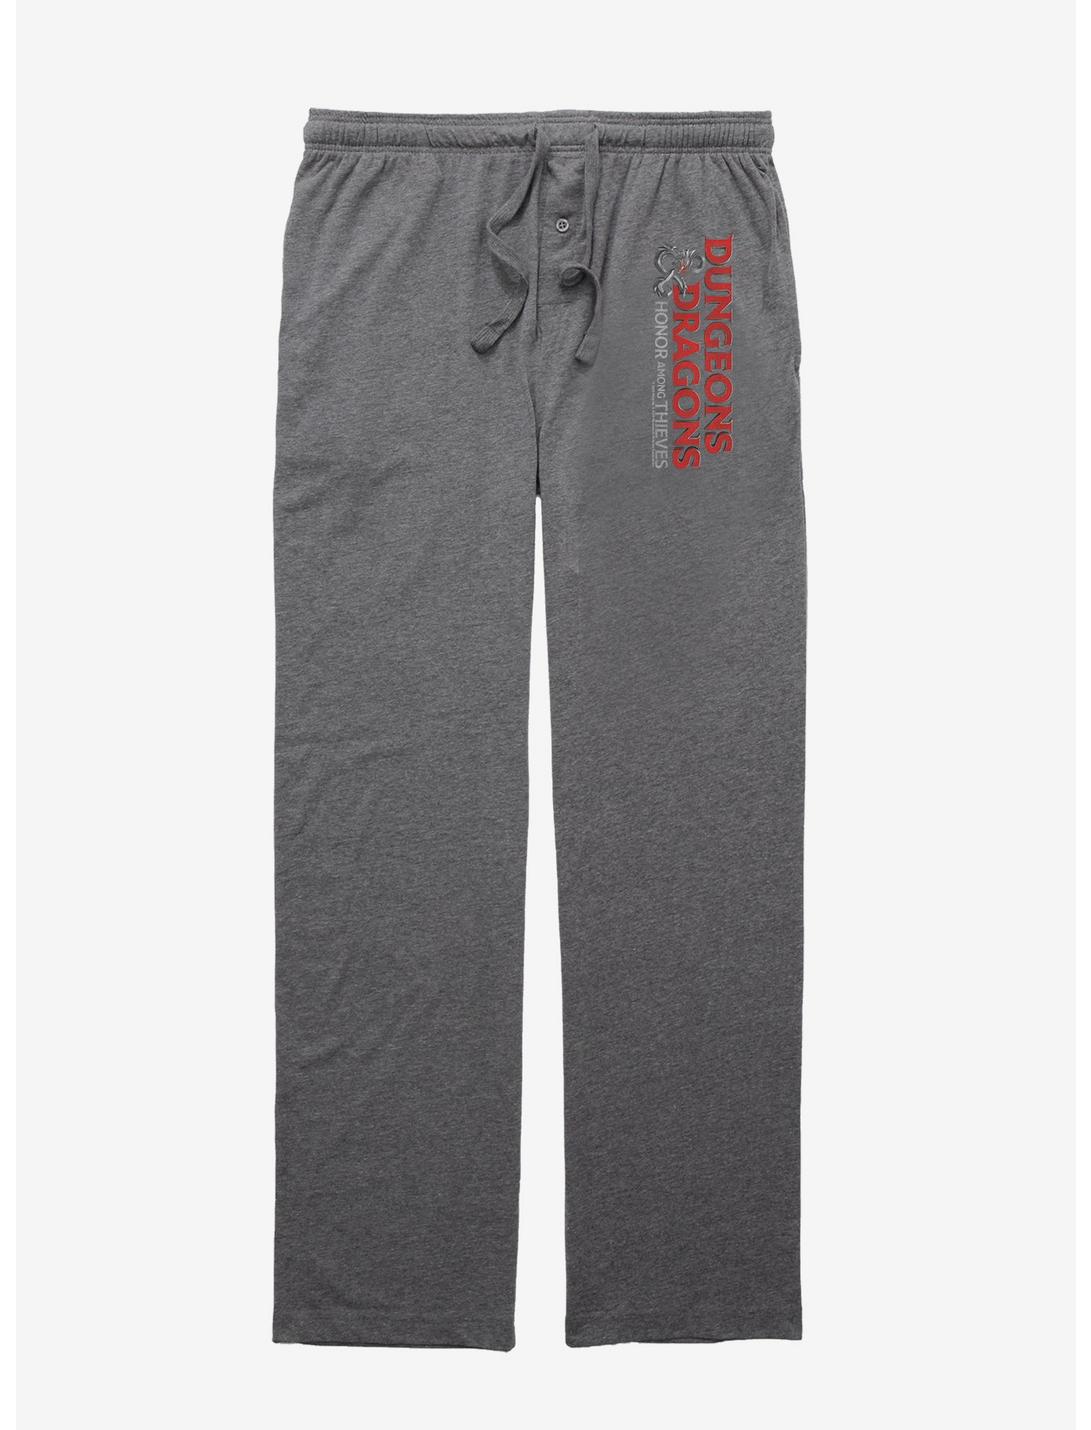 Dungeons & Dragons: Honor Among Thieves Movie Title Pajama Pants, GRAPHITE HEATHER, hi-res